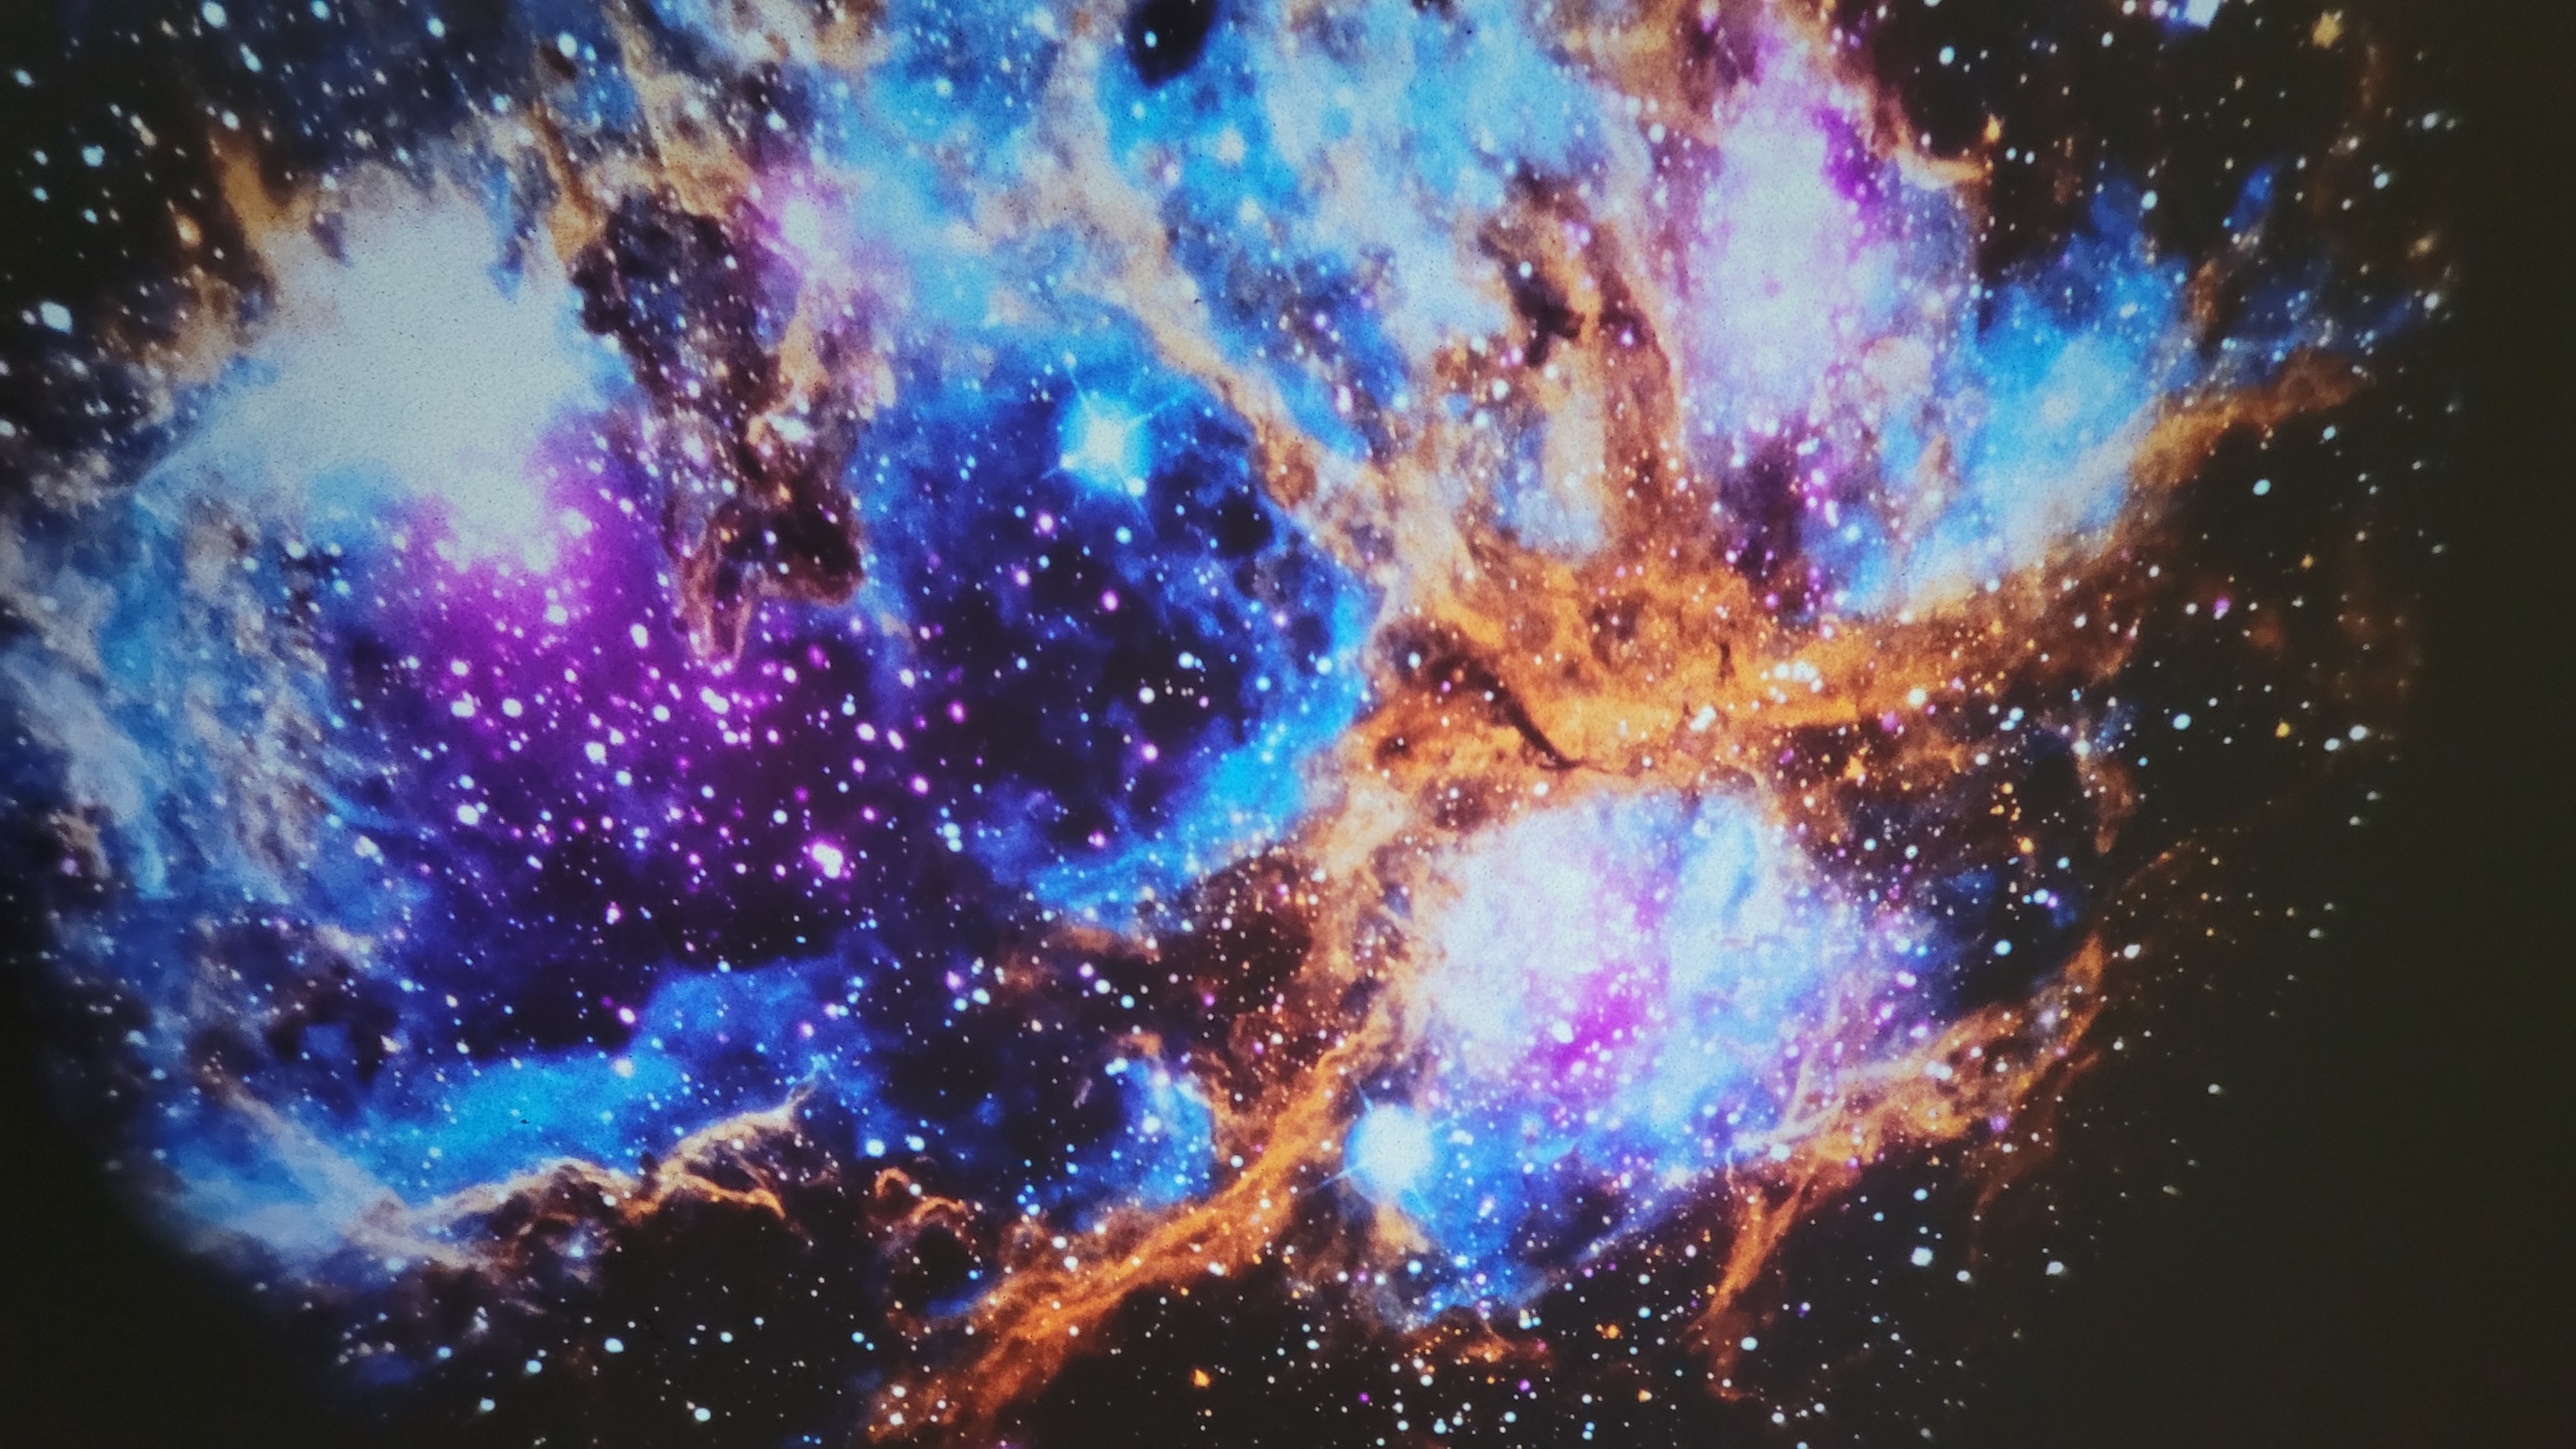 A Pococo Galaxy Projector projection of the Lobster Nebula